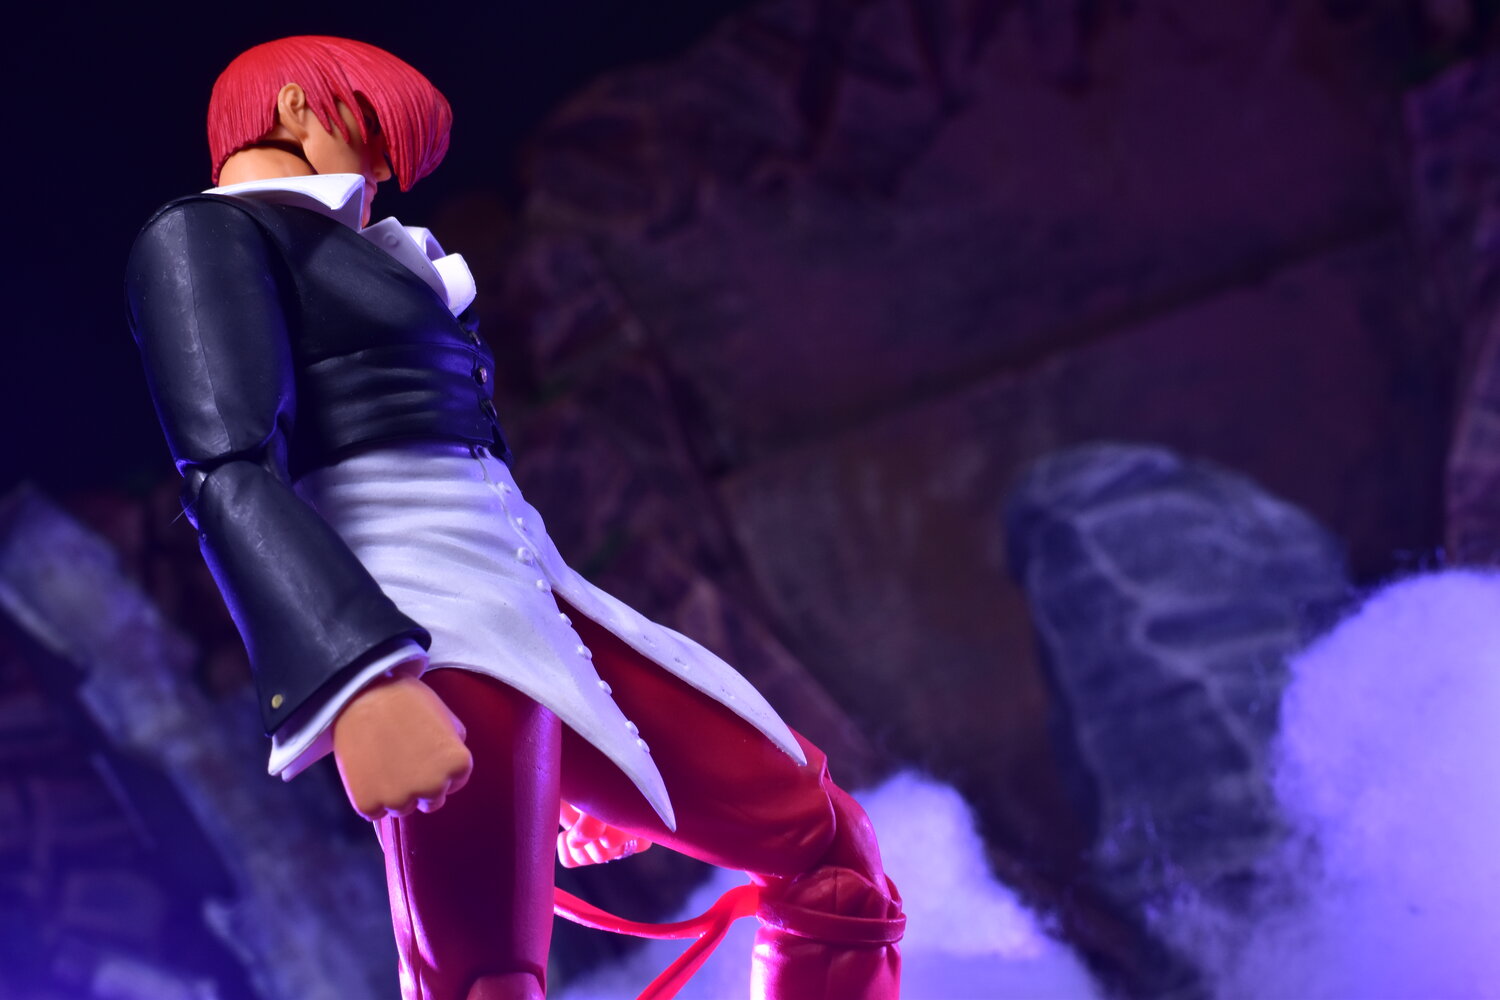 Figura Iori Yagami - King of Fighters 98 - Storm Collectibles